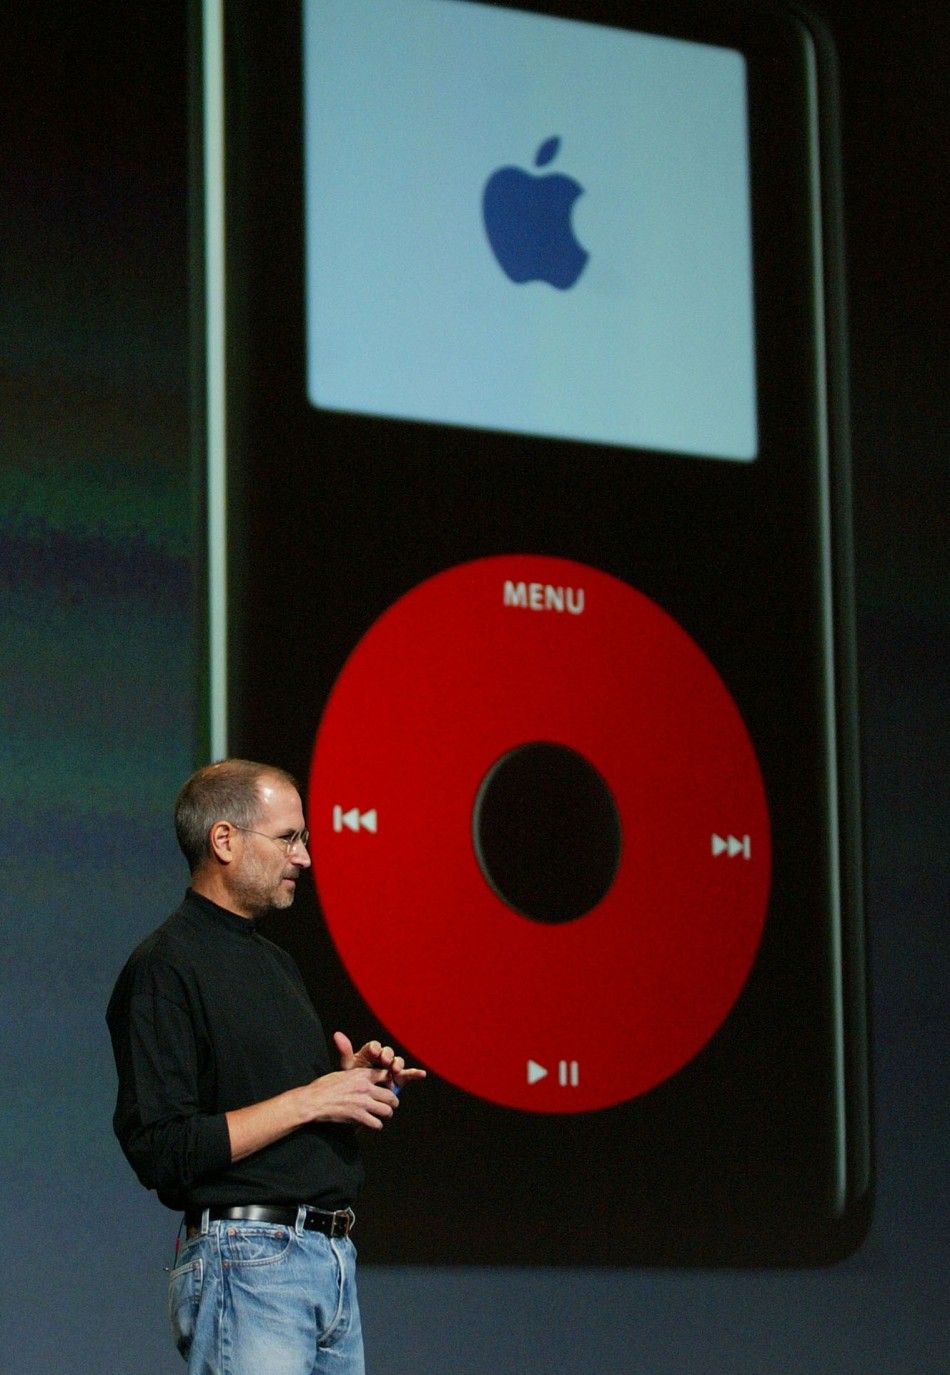 Apple CEO Steve Jobs introduced the iPod U2 Special Edition as part of a partnership between Apple, U2 and Universal Music Group UMG during a press conference in San Jose, California, October 26, 2004. The new special Edition U2 iPod which can hold up t